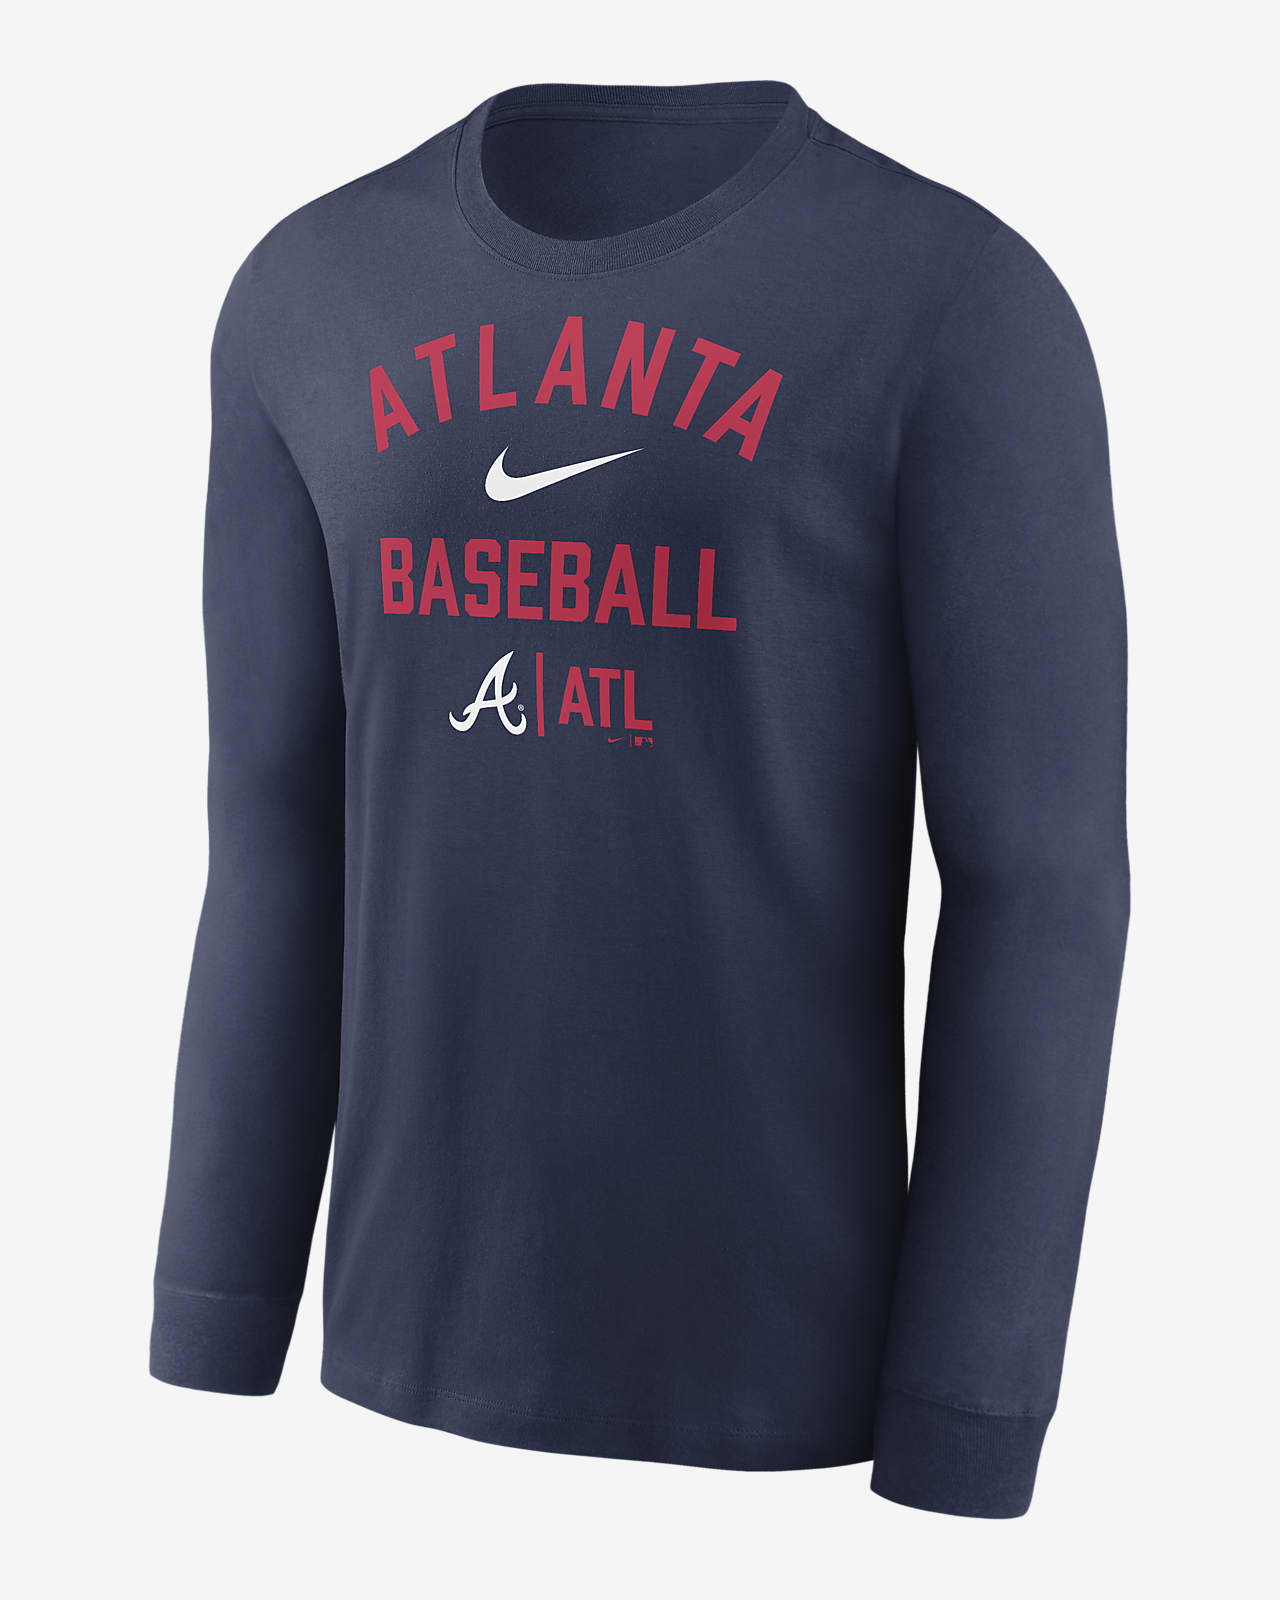 braves clothing clearance